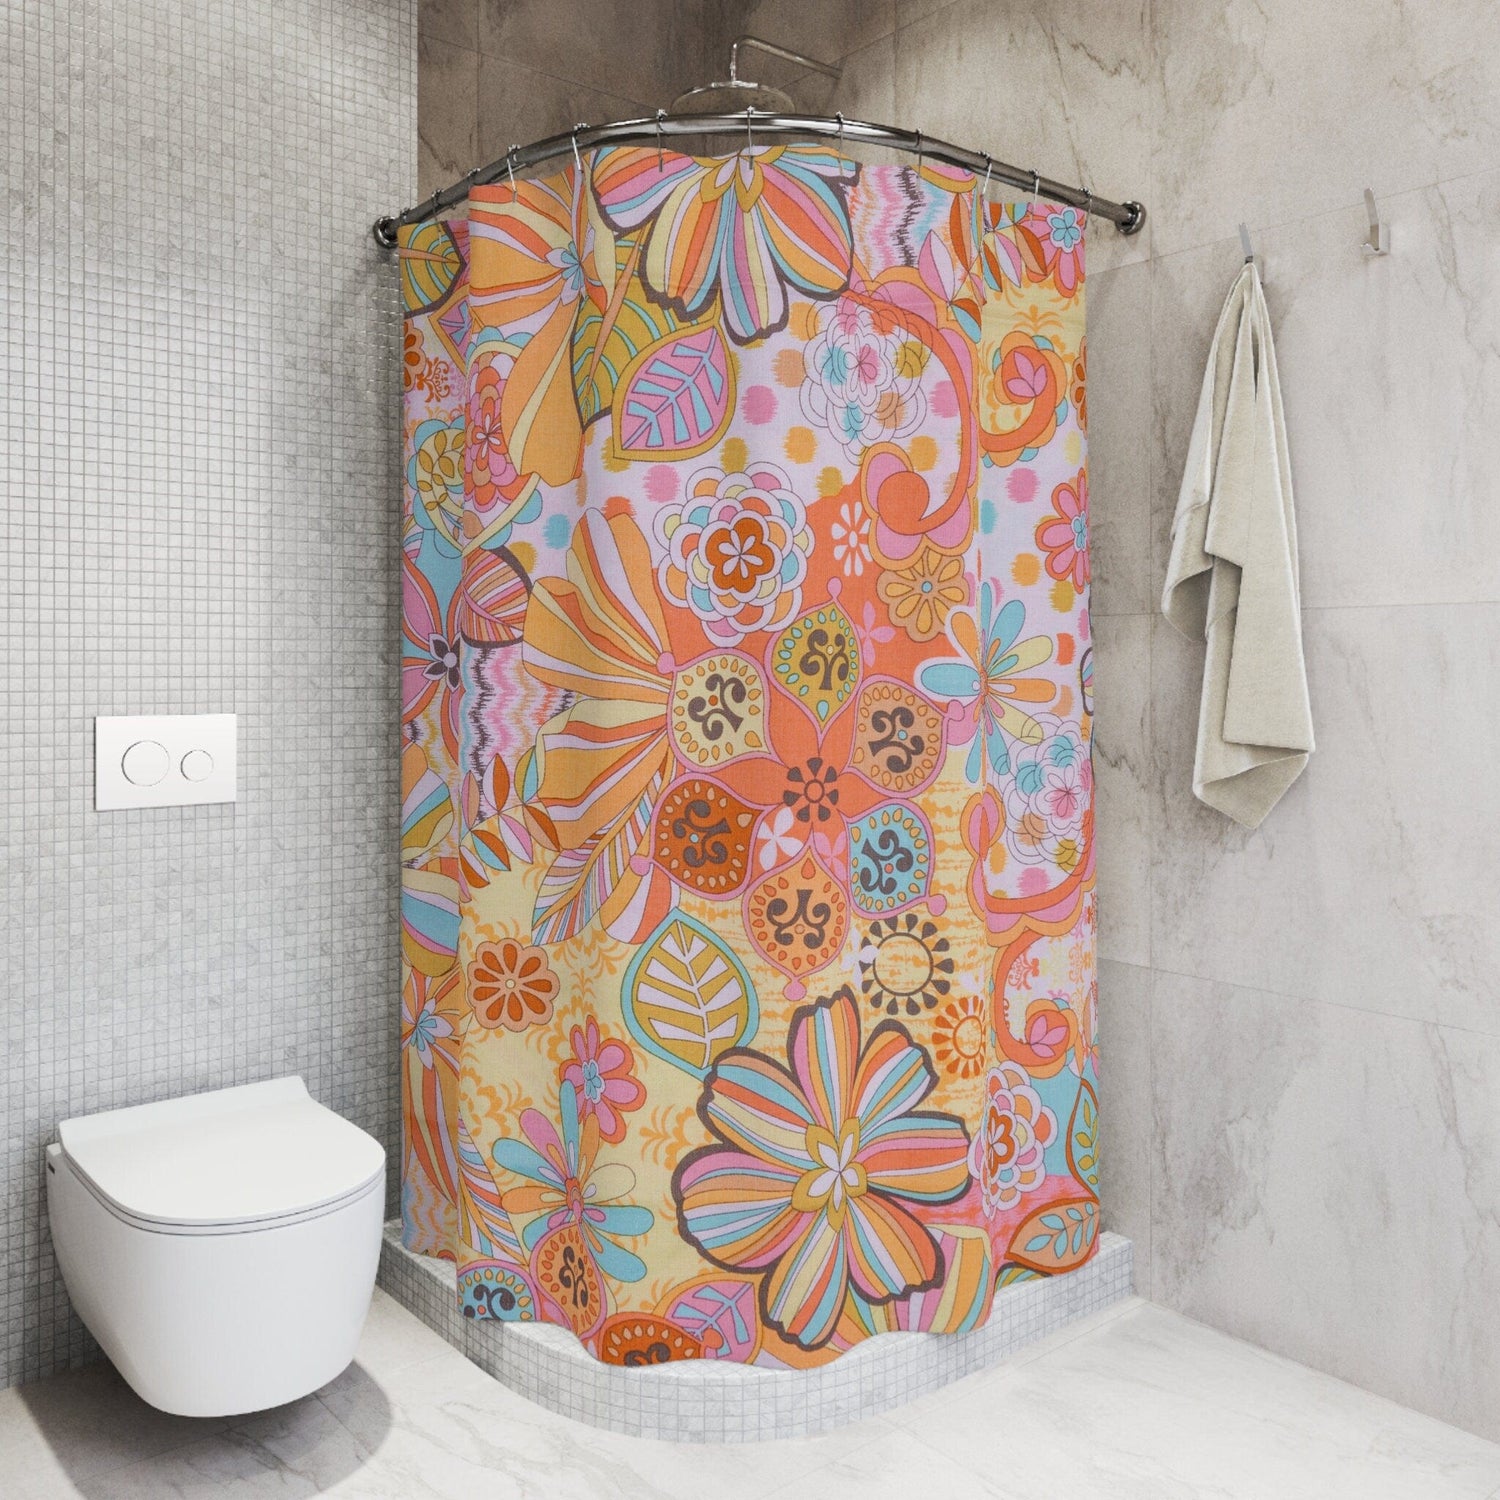 Kate McEnroe New York Retro Trippy Flower Power Shower Curtain, 70s Mid Mod Hippie Chic Floral Bathroom Decor with Groovy Orange, Yellow, and Blue PaletteShower CurtainsSC - PIN - GRV - 7X7